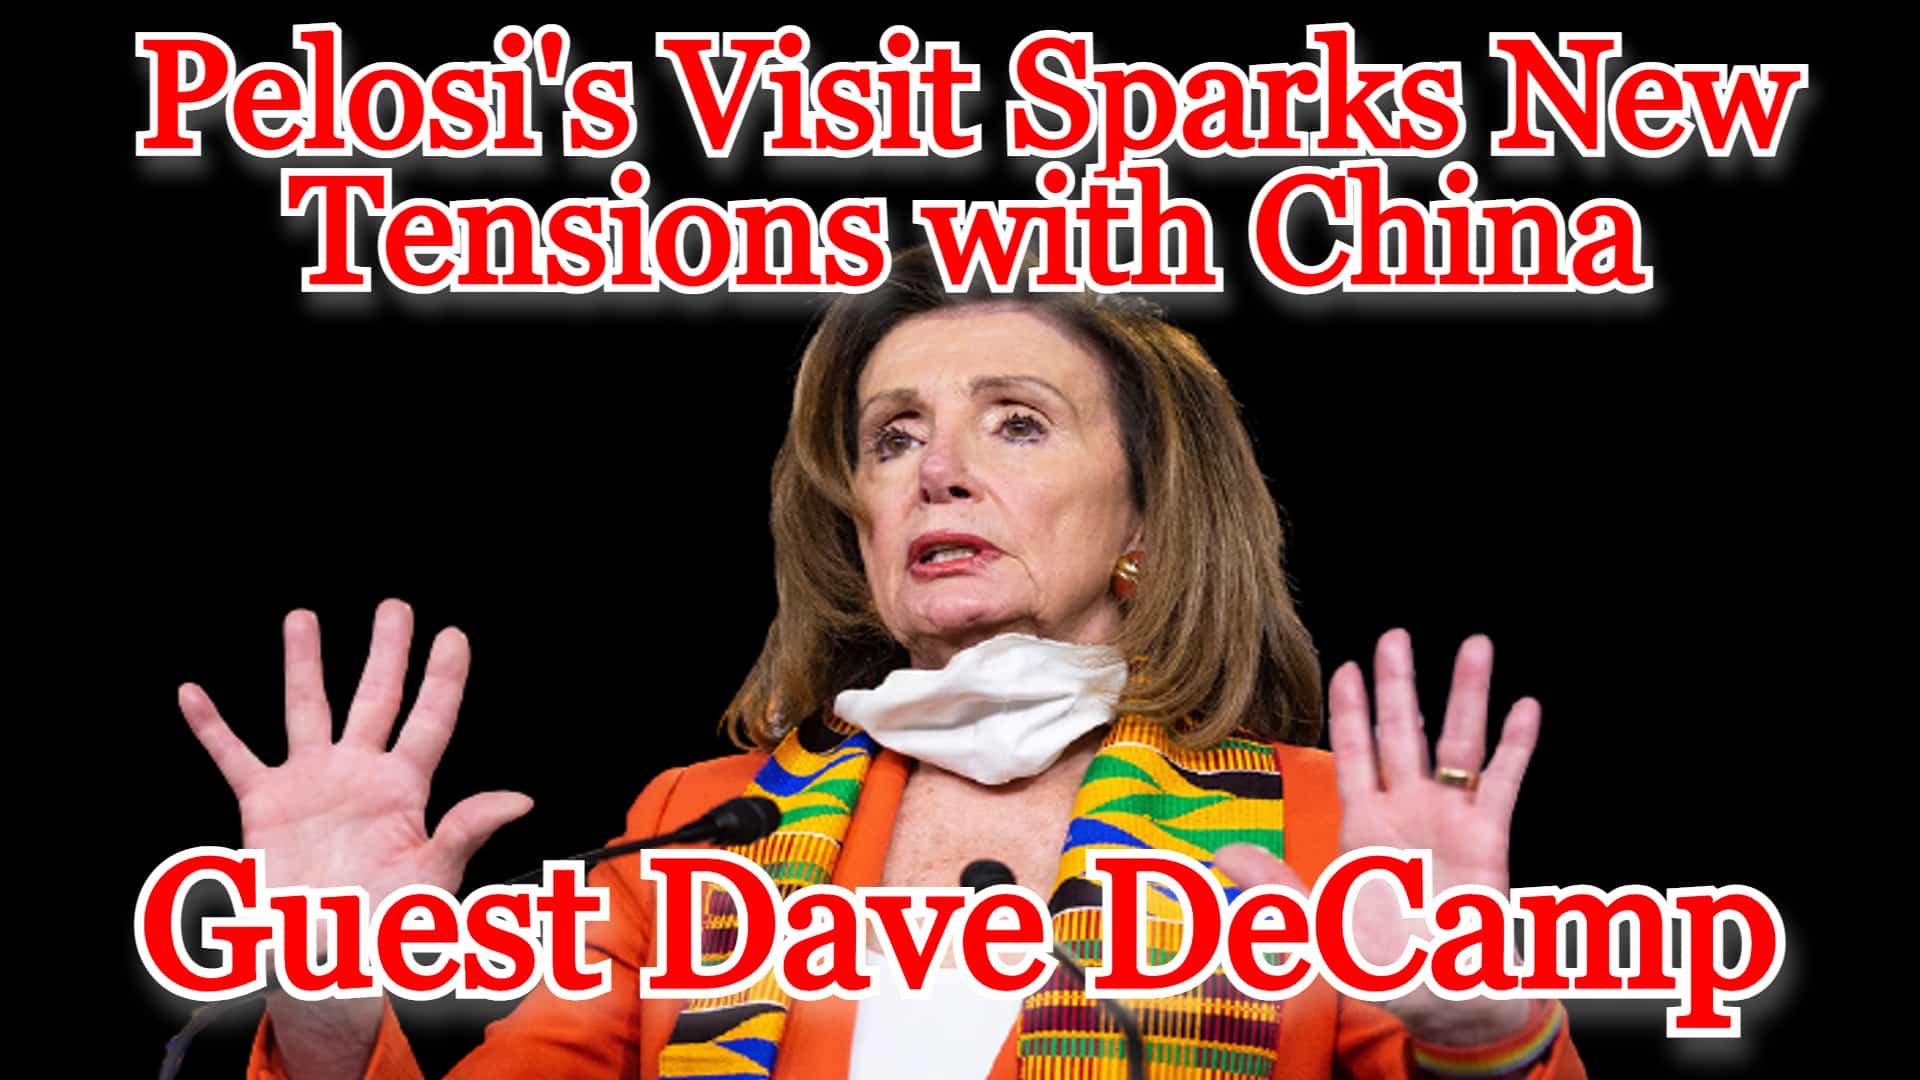 COI #309: Pelosi’s Visit Sparks New Tensions with China guest Dave DeCamp